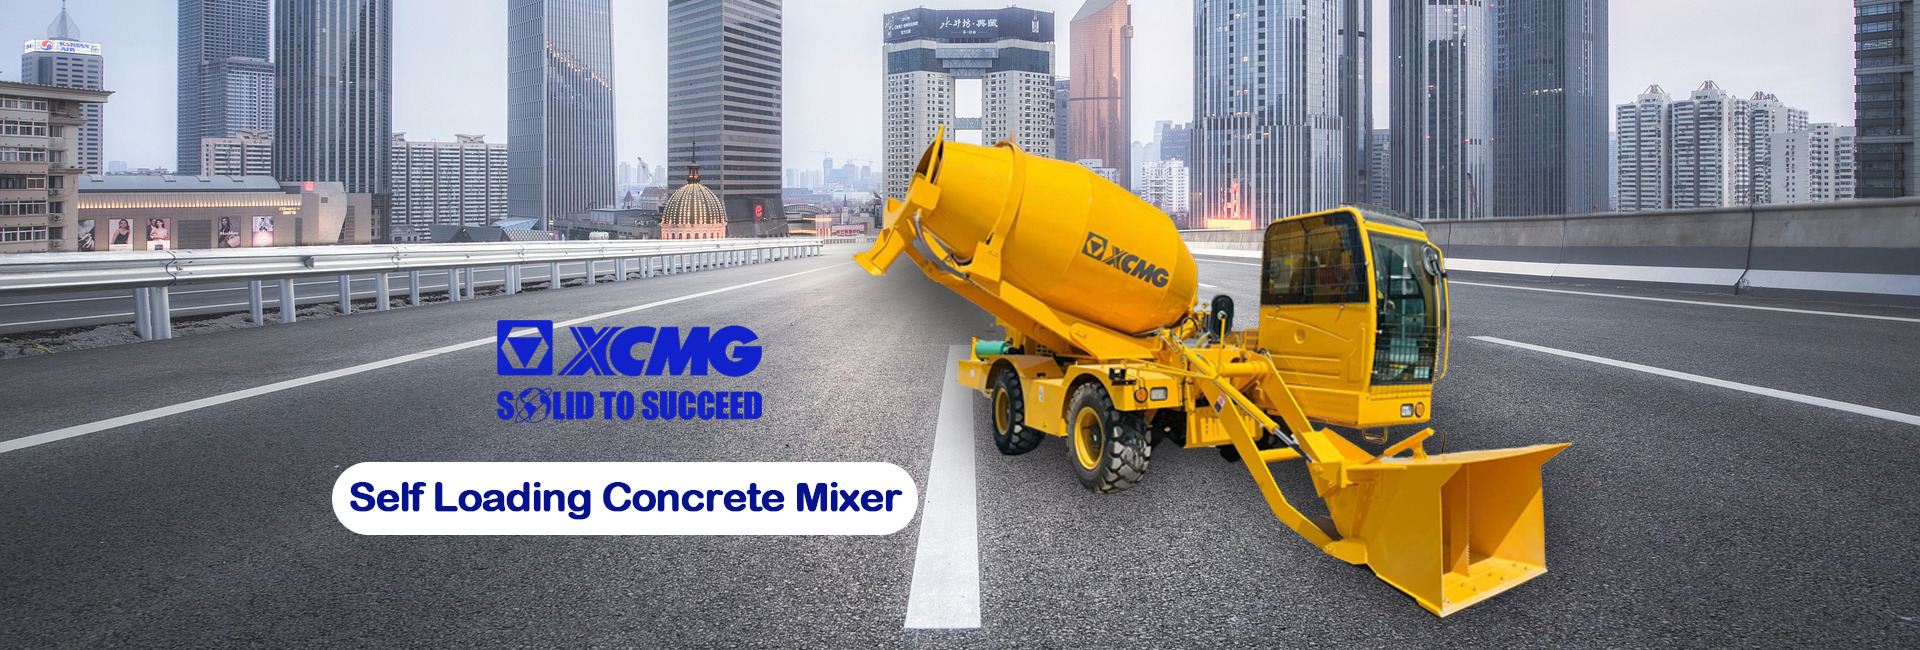 XCMG E-commerce Inc. - Construction machinery - new undefined: picture 1